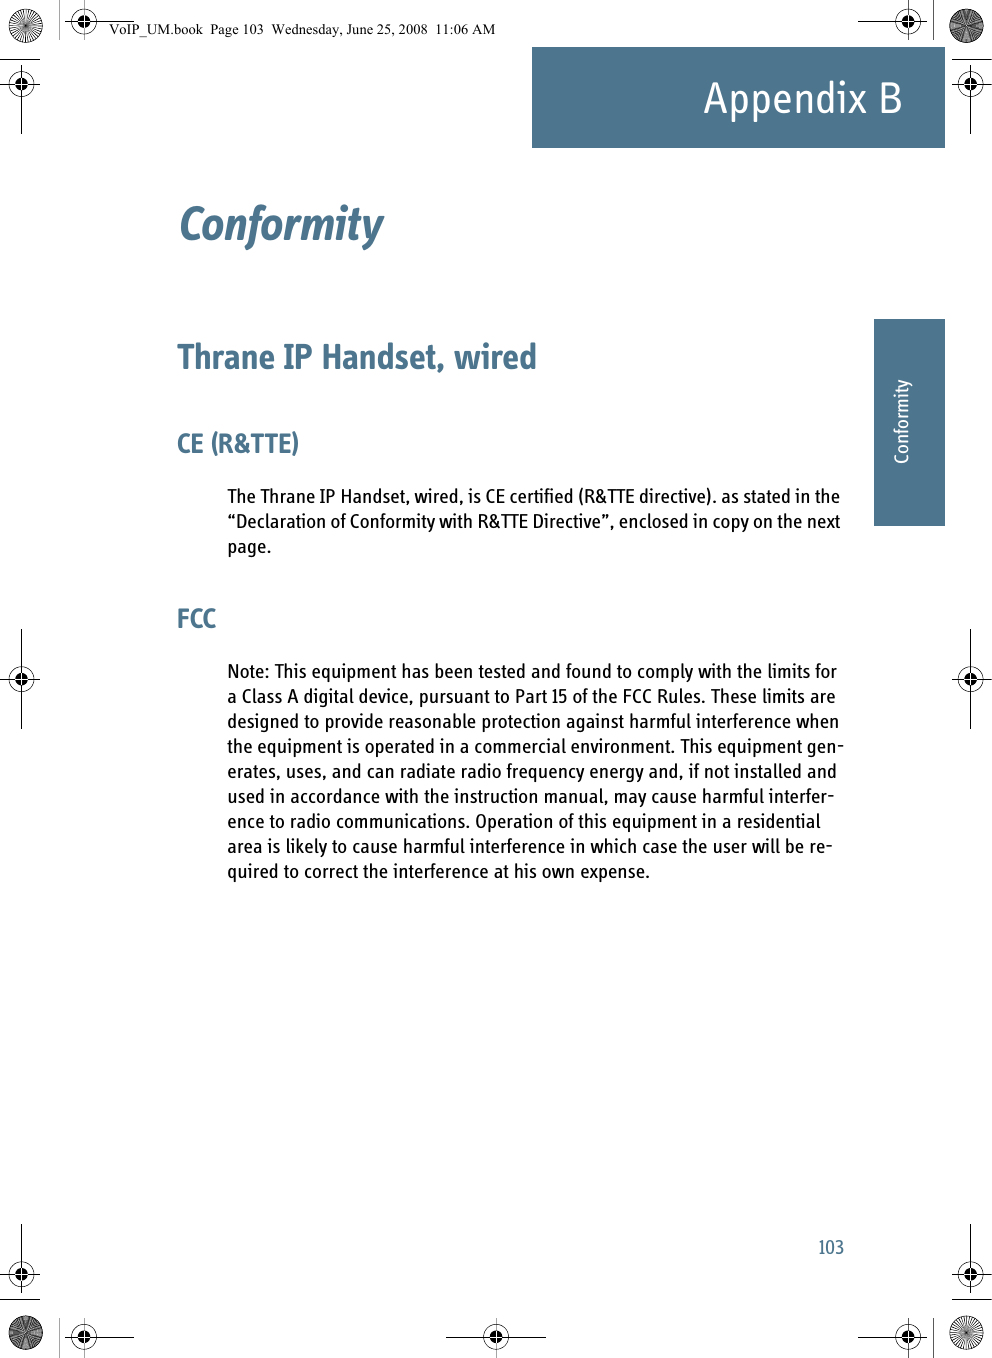 103Appendix BBBBBBConformityConformity BThrane IP Handset, wiredCE (R&amp;TTE)The Thrane IP Handset, wired, is CE certified (R&amp;TTE directive). as stated in the “Declaration of Conformity with R&amp;TTE Directive”, enclosed in copy on the next page.FCCNote: This equipment has been tested and found to comply with the limits for a Class A digital device, pursuant to Part 15 of the FCC Rules. These limits are designed to provide reasonable protection against harmful interference when the equipment is operated in a commercial environment. This equipment gen-erates, uses, and can radiate radio frequency energy and, if not installed and used in accordance with the instruction manual, may cause harmful interfer-ence to radio communications. Operation of this equipment in a residential area is likely to cause harmful interference in which case the user will be re-quired to correct the interference at his own expense.VoIP_UM.book  Page 103  Wednesday, June 25, 2008  11:06 AM